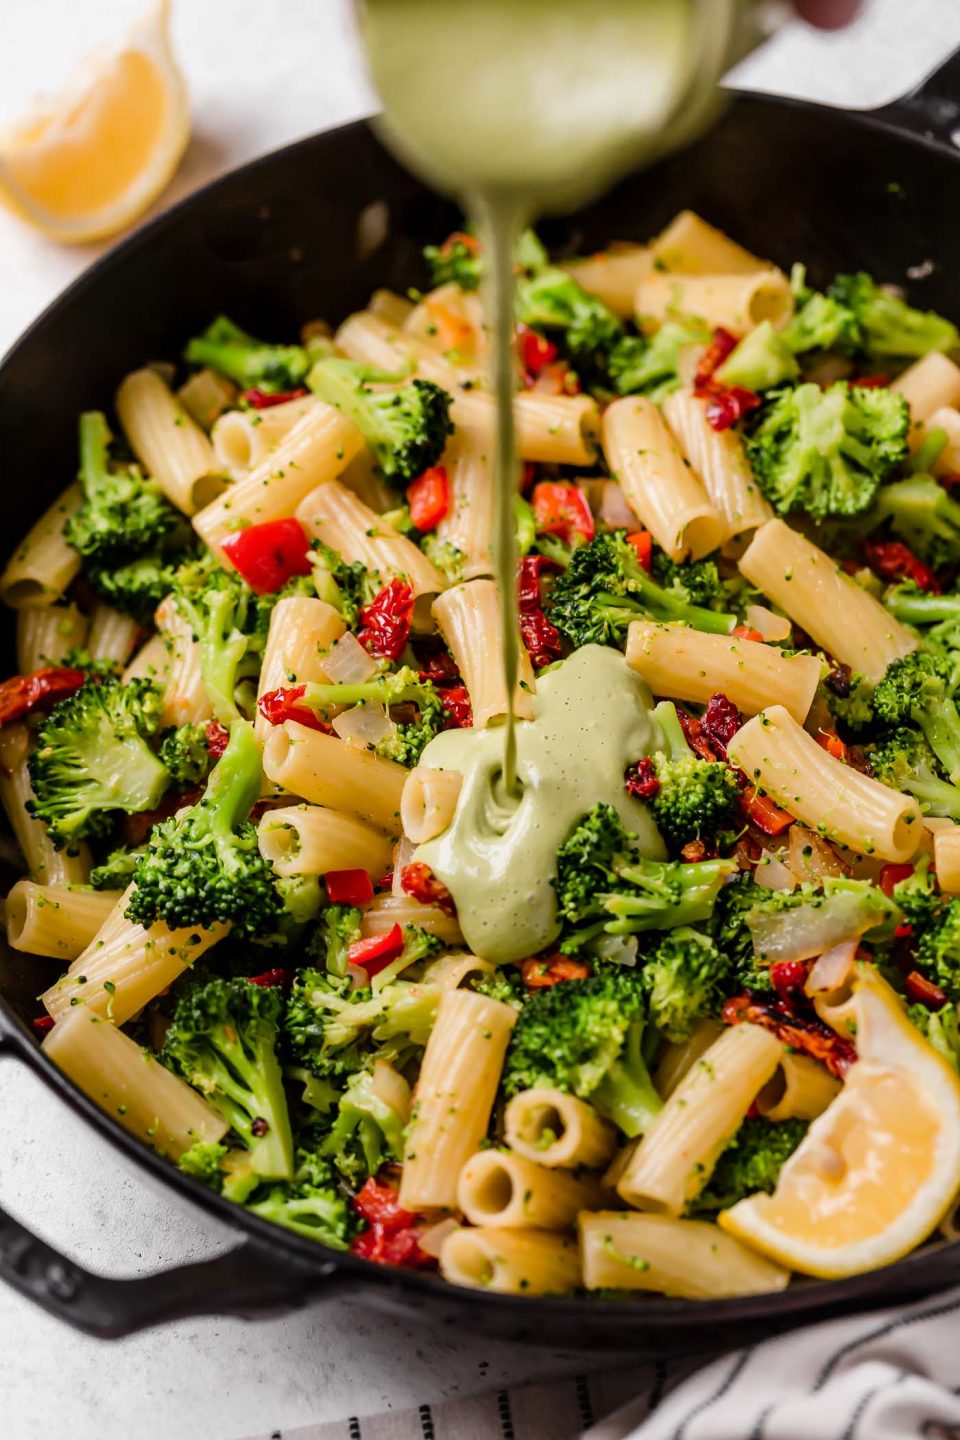 An overhead shot of vegan pasta sauce being poured over cooked pasta, sun-dried tomatoes, and cooked broccoli in a black skillet atop a white surface.